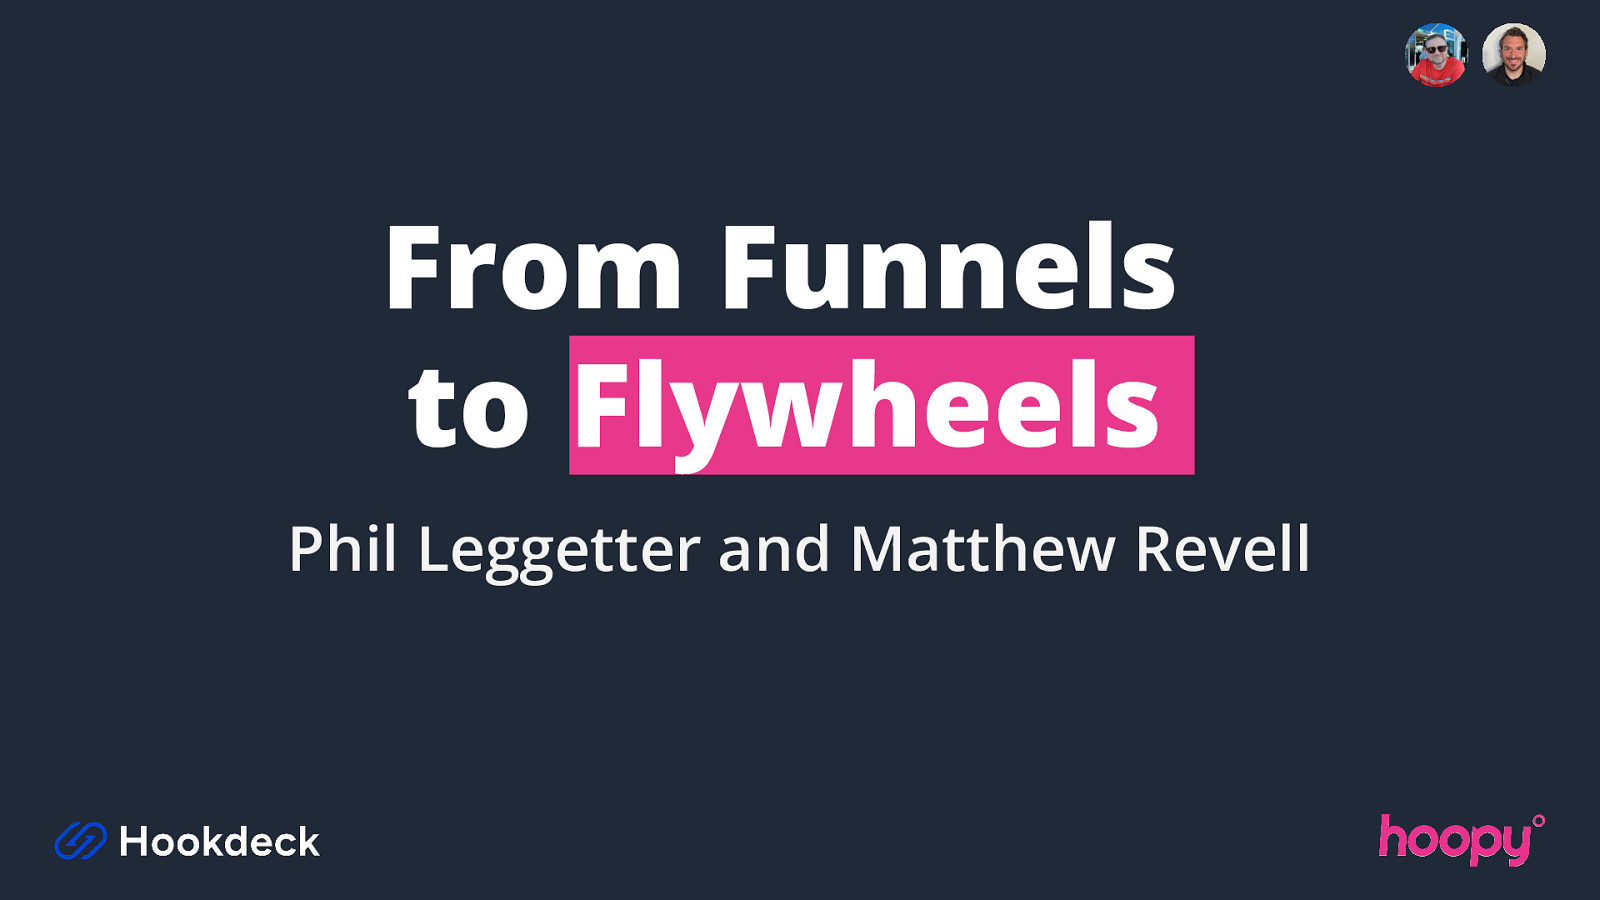 From funnels to flywheels: tools for thinking about DevRel by Phil Leggetter